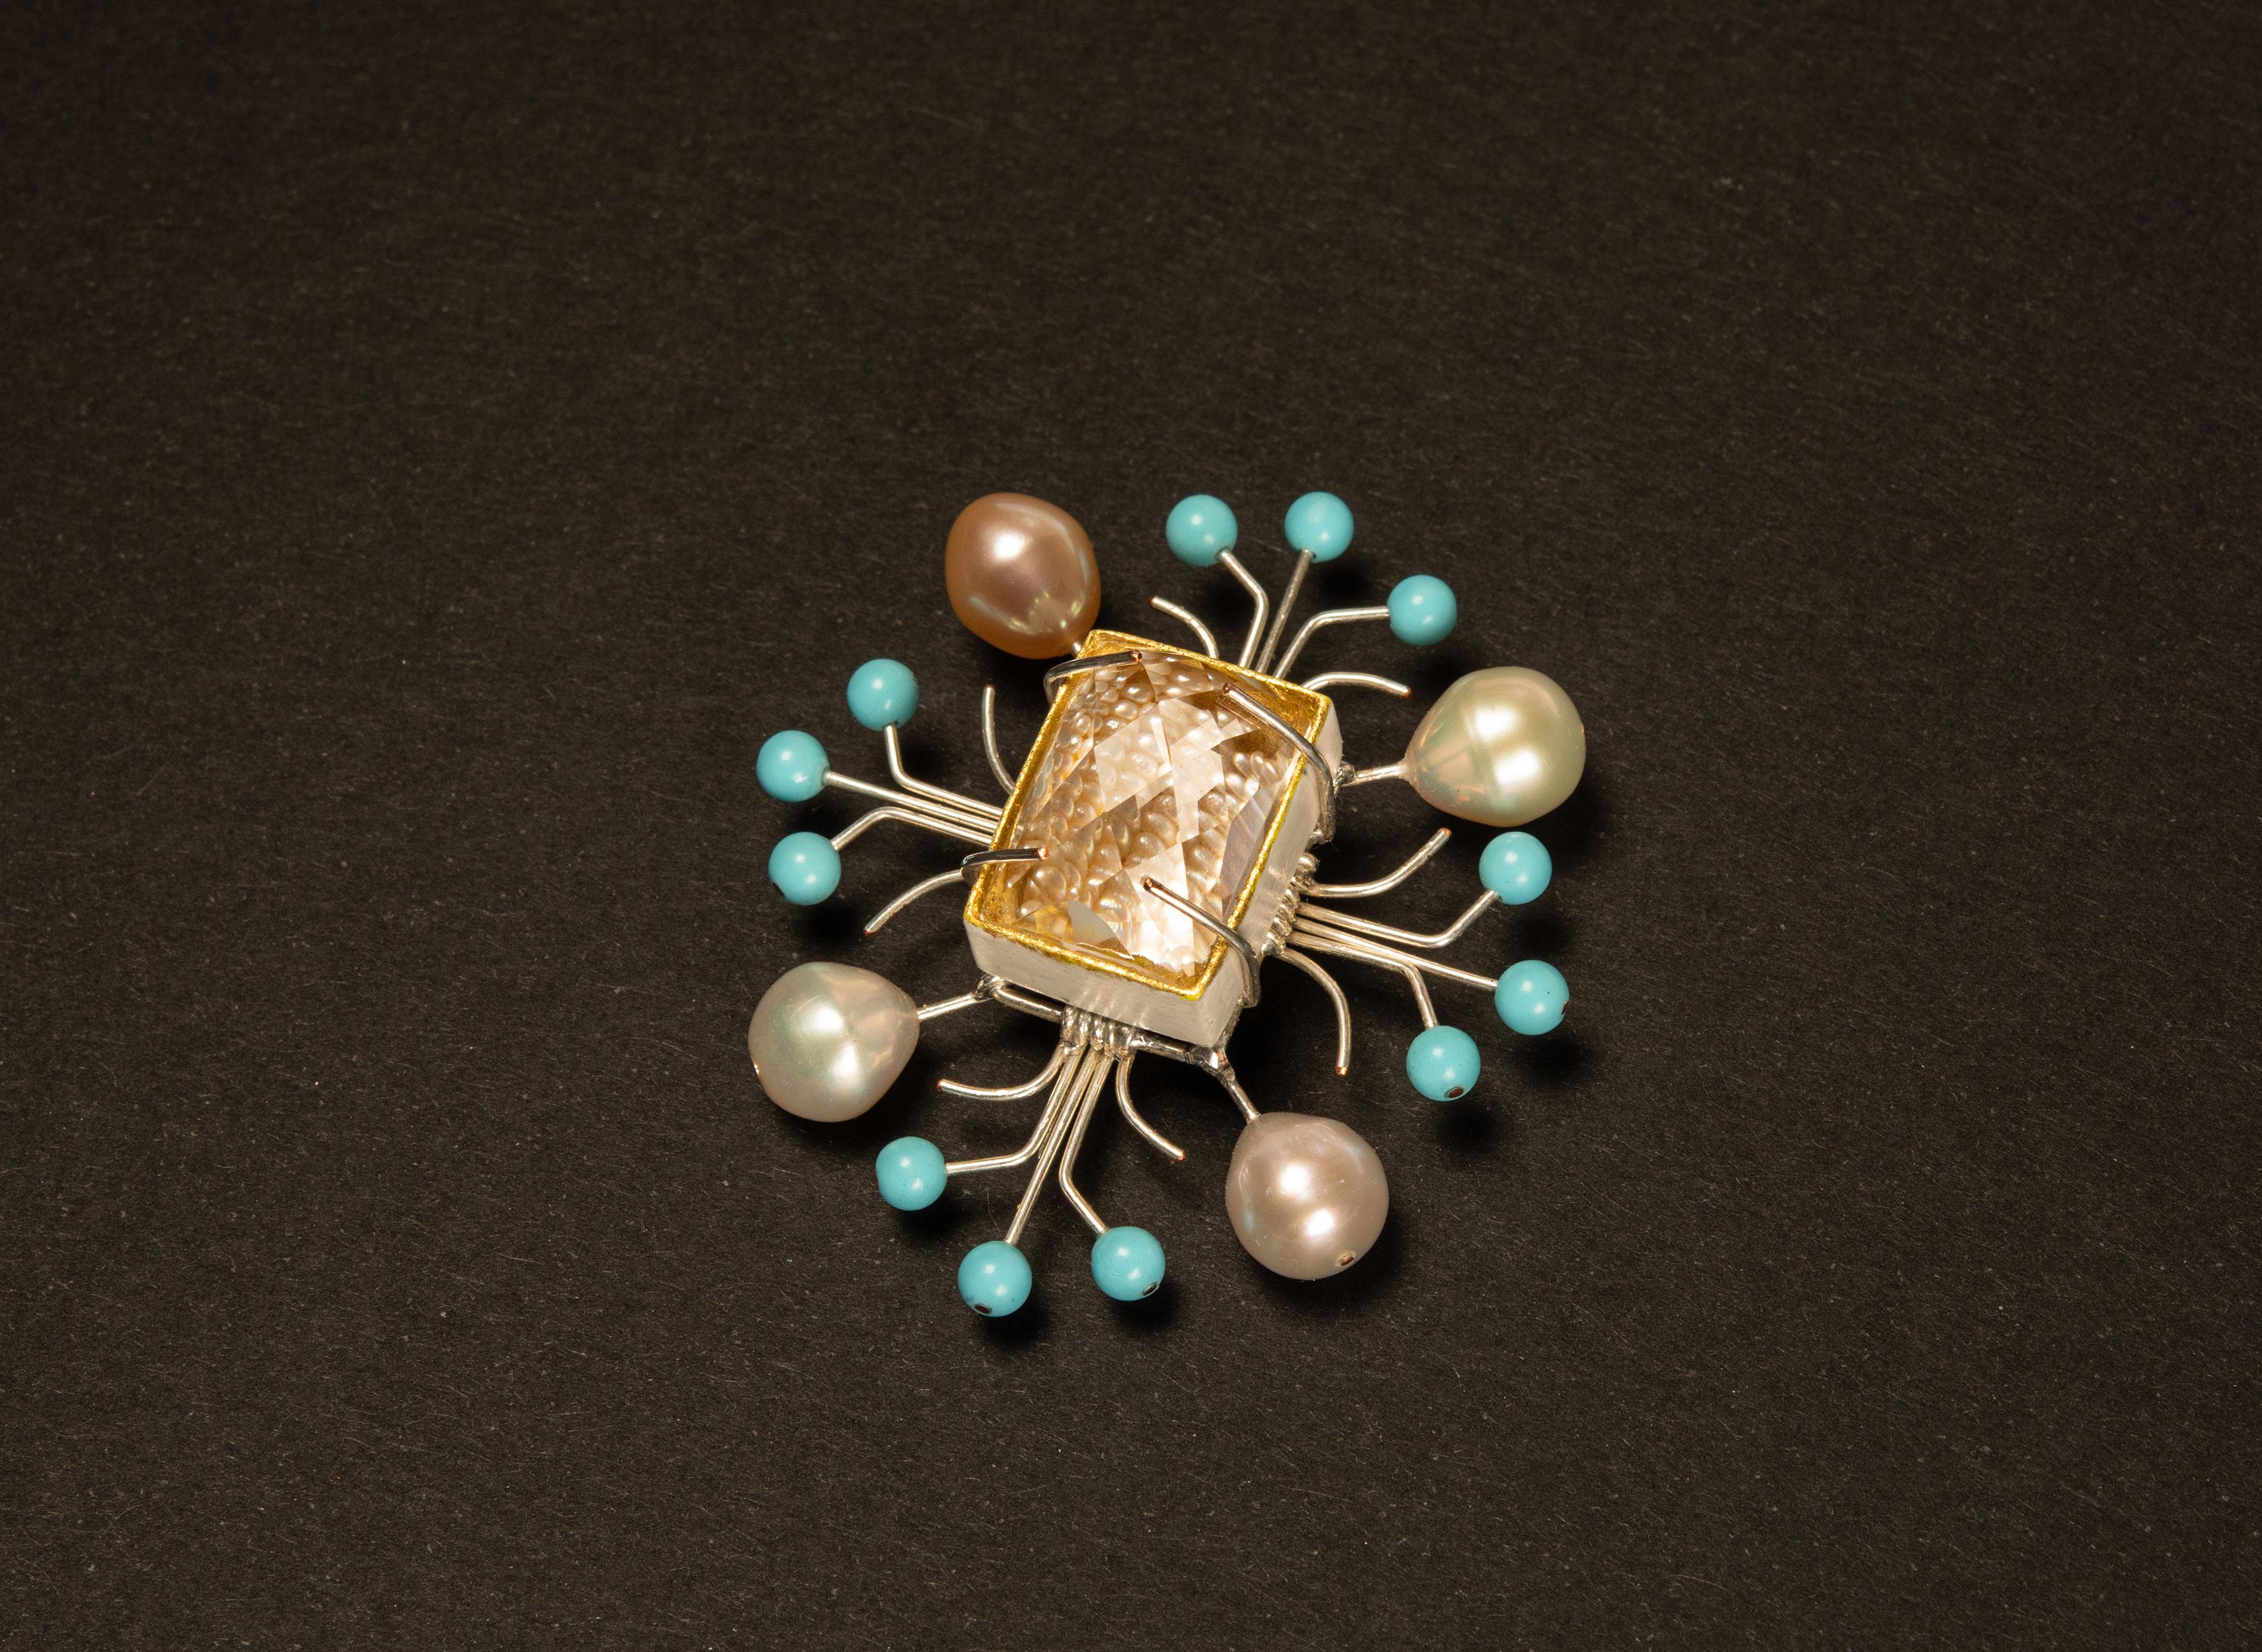 Brooch “Artis”, 2018, is a one-of-a-kind contemporary author jewelry by italian artist Gian Luca Bartellone.
Materials: papier-mâché, silver, silver-plated copper, rock crystal, pearls, turquoise paste, gold leaf 22kt.

Great appearance with the